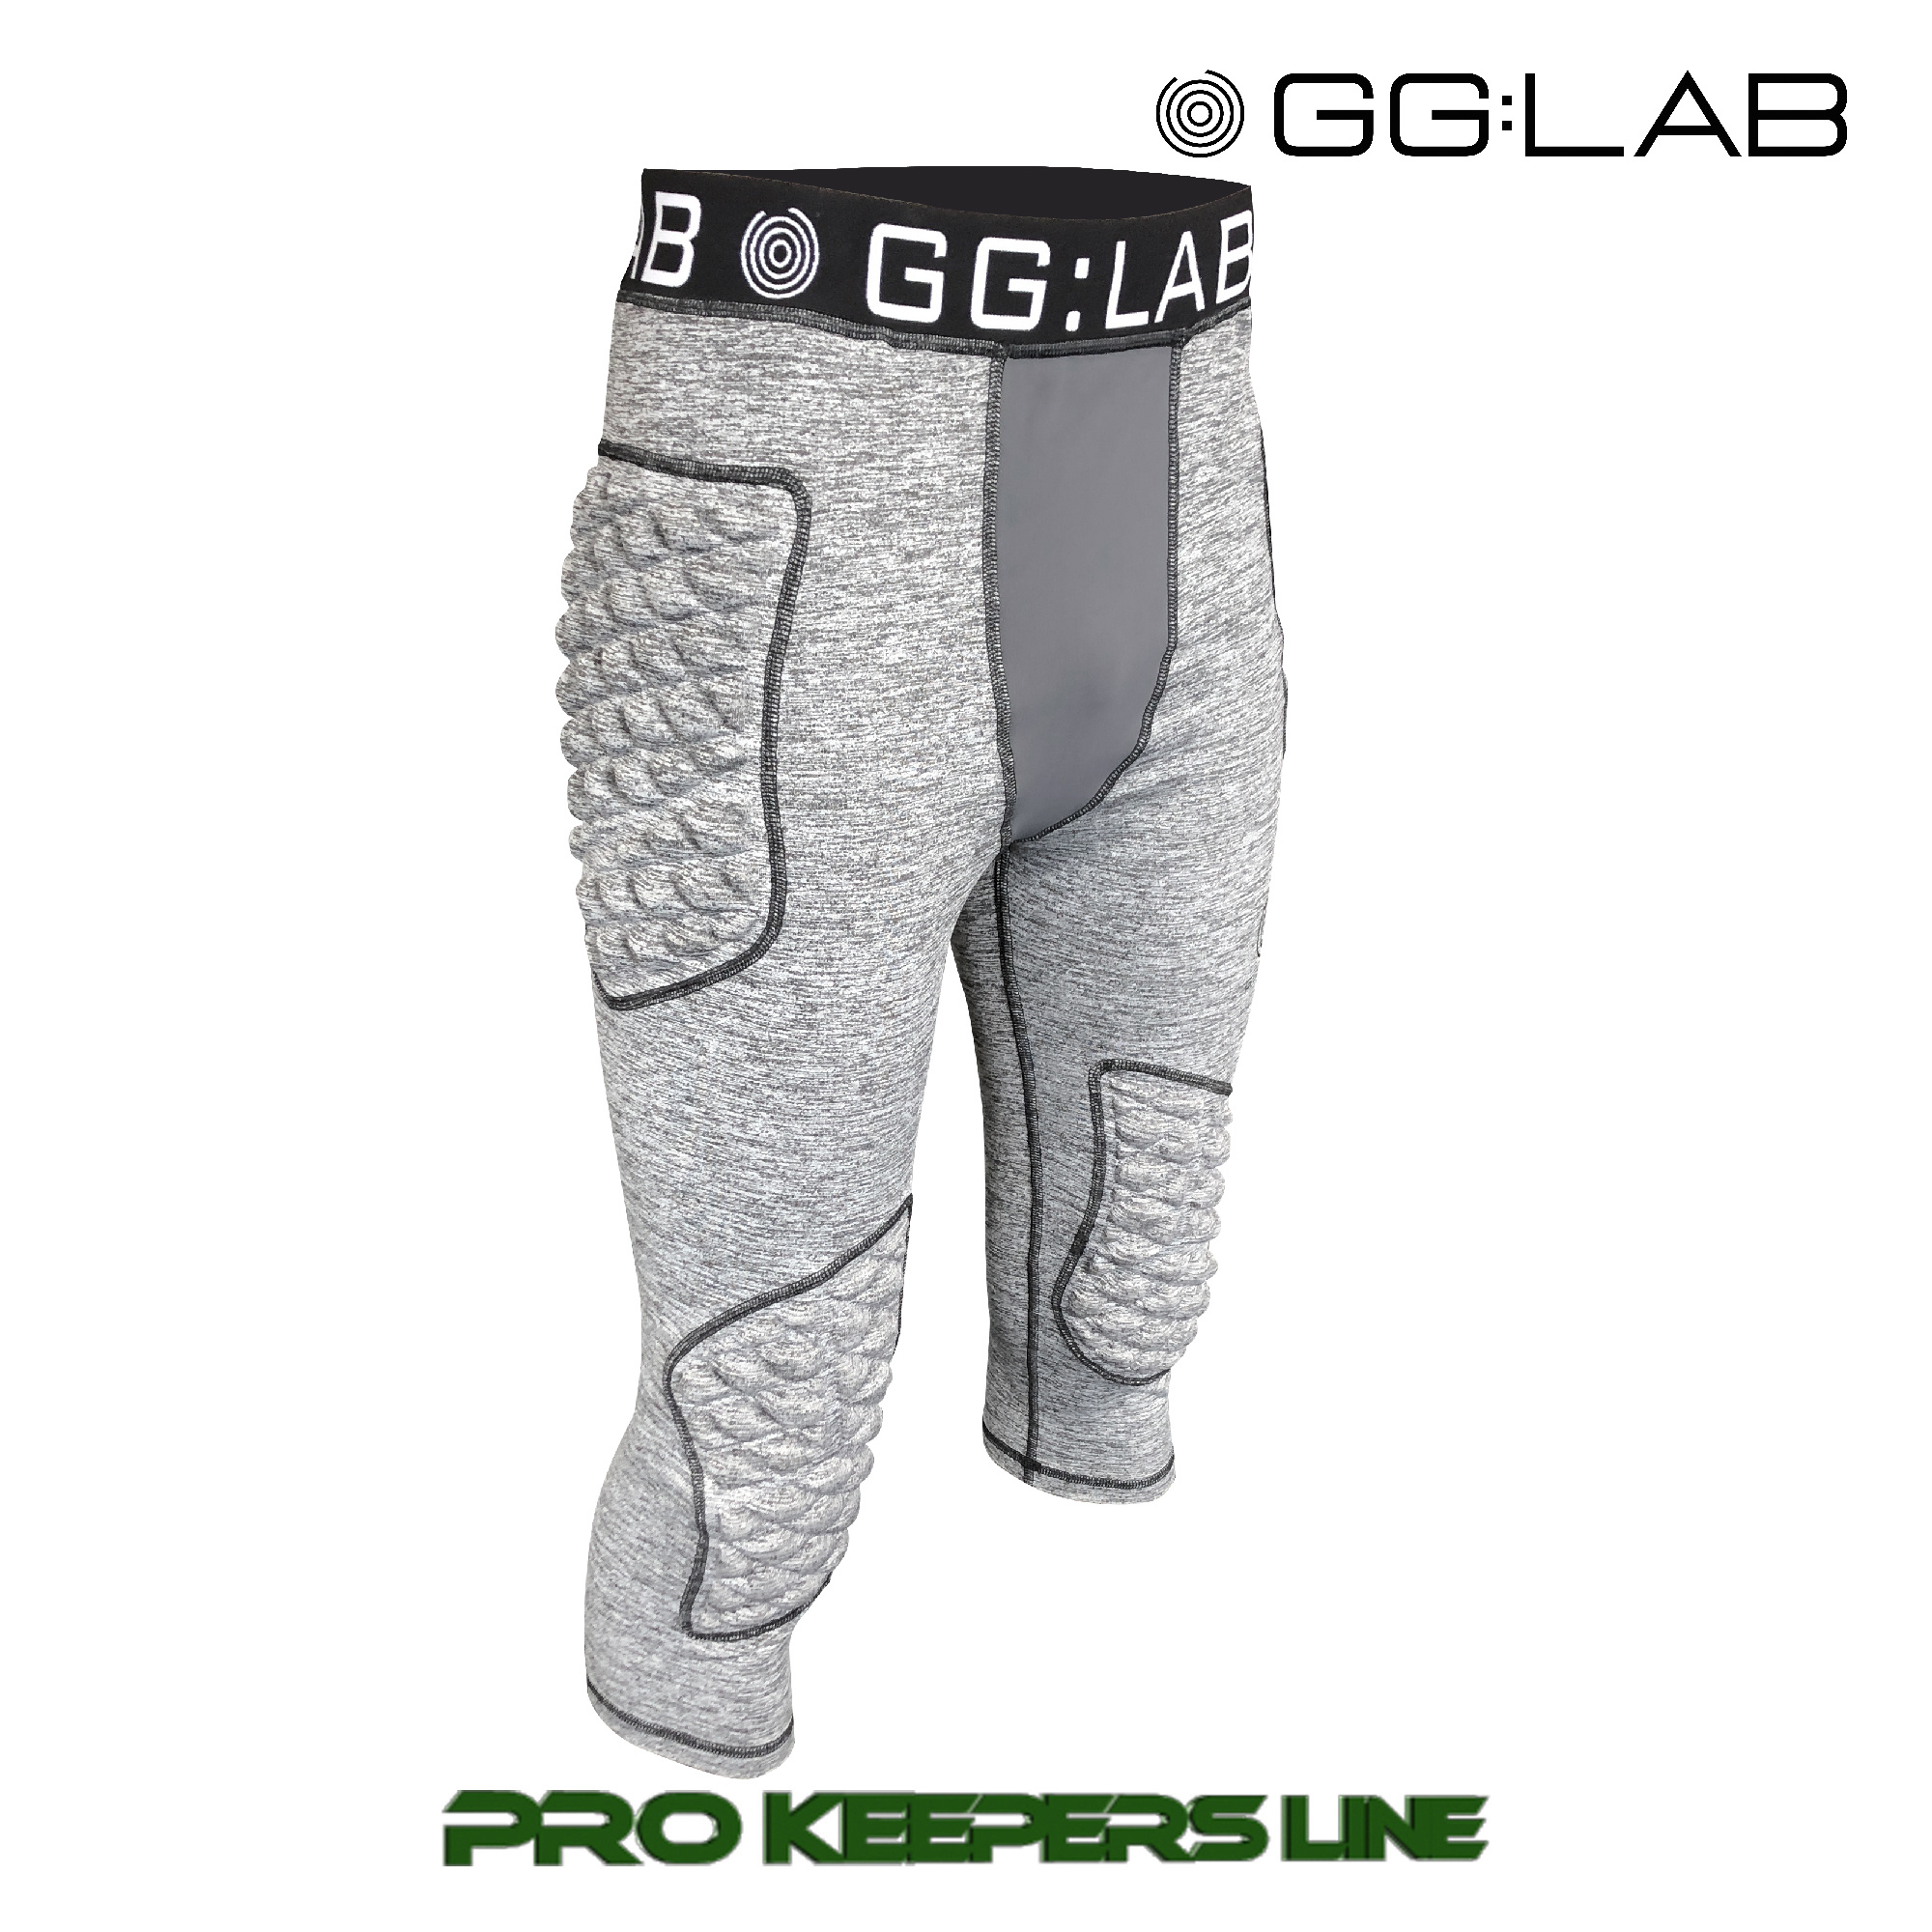 GG:LAB PROTECT BASELAYER 3/4 PANT BY GLOVEGLU (PADDED/GEPOLSTERT)